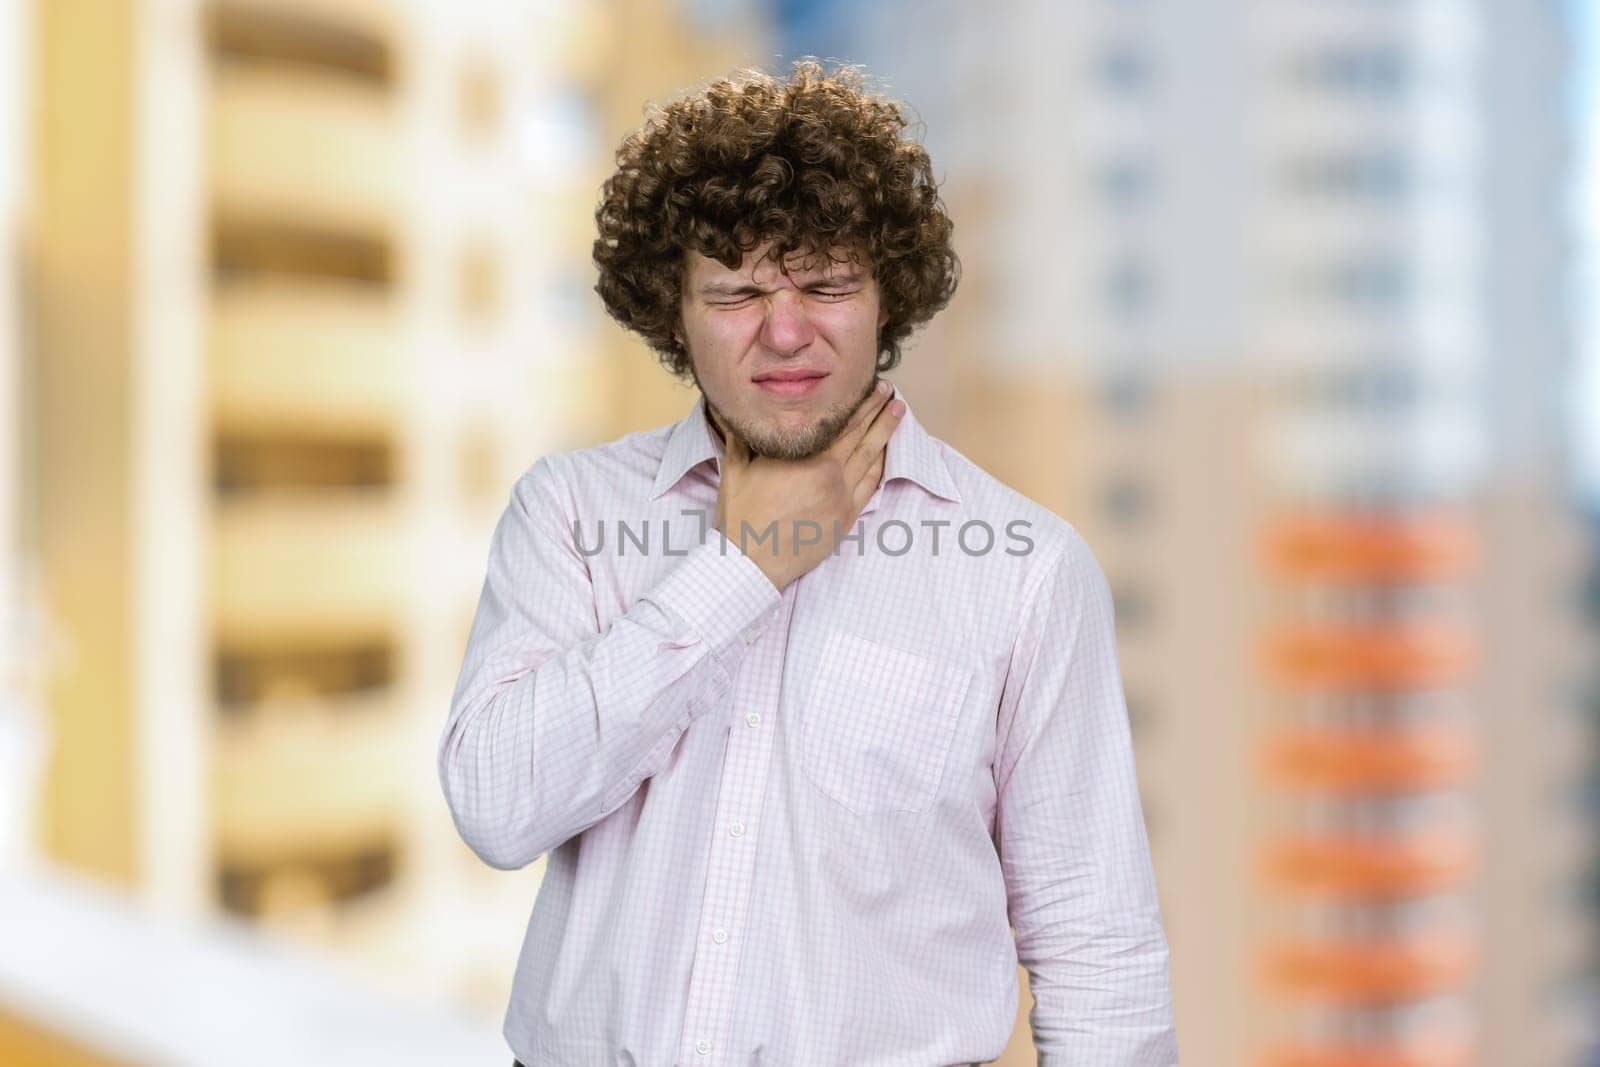 Young handsome man with curly hair touching his neck. Residential area buildings in the background.